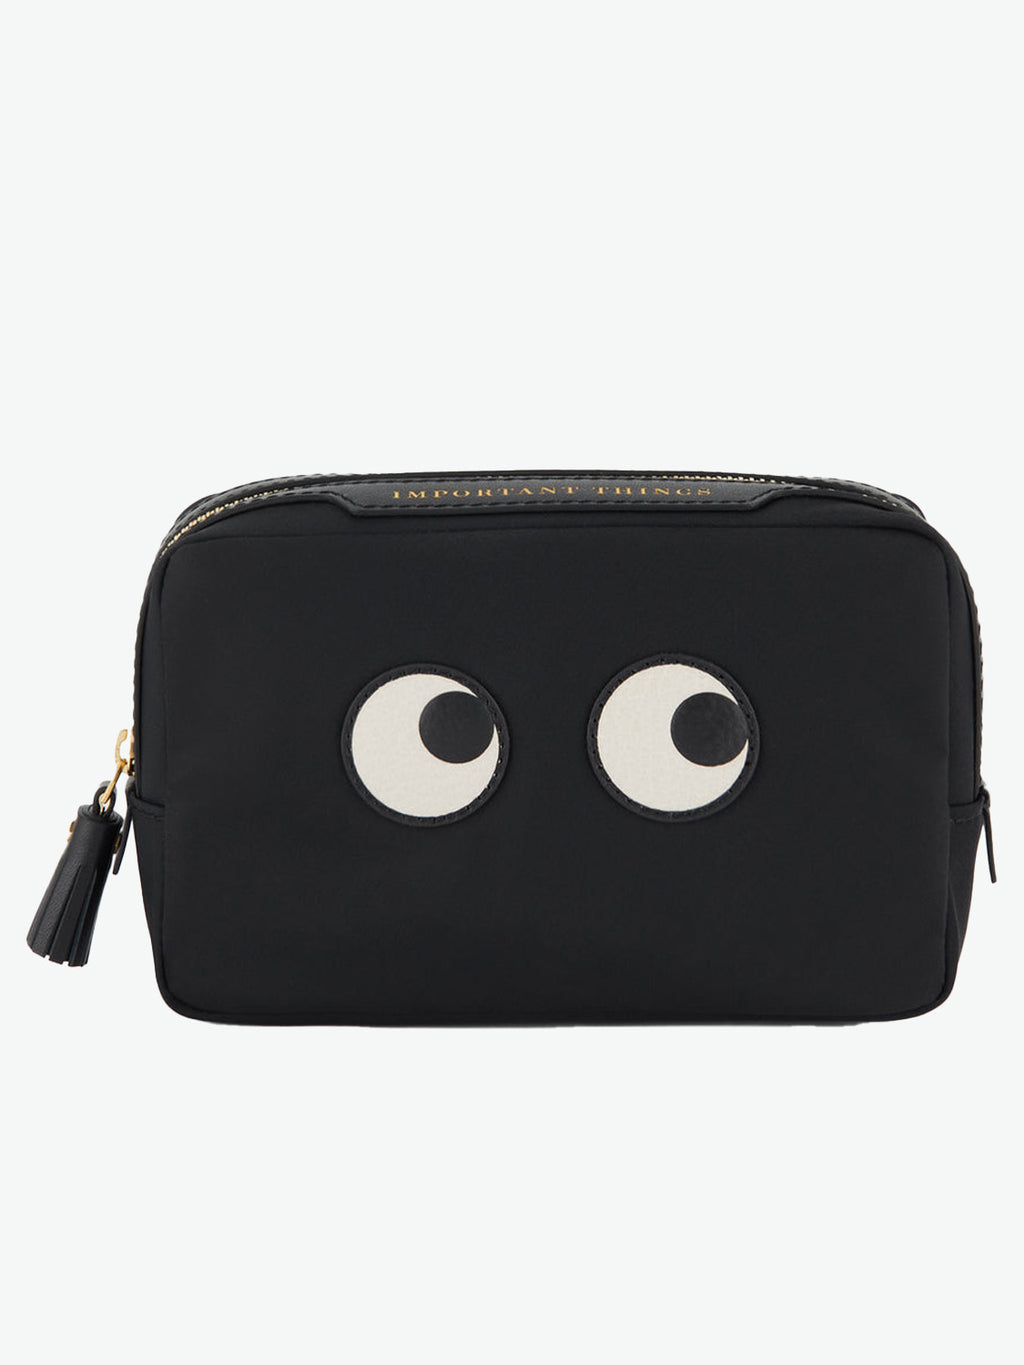 Anya Hindmarch Eyes Important Things Pouch